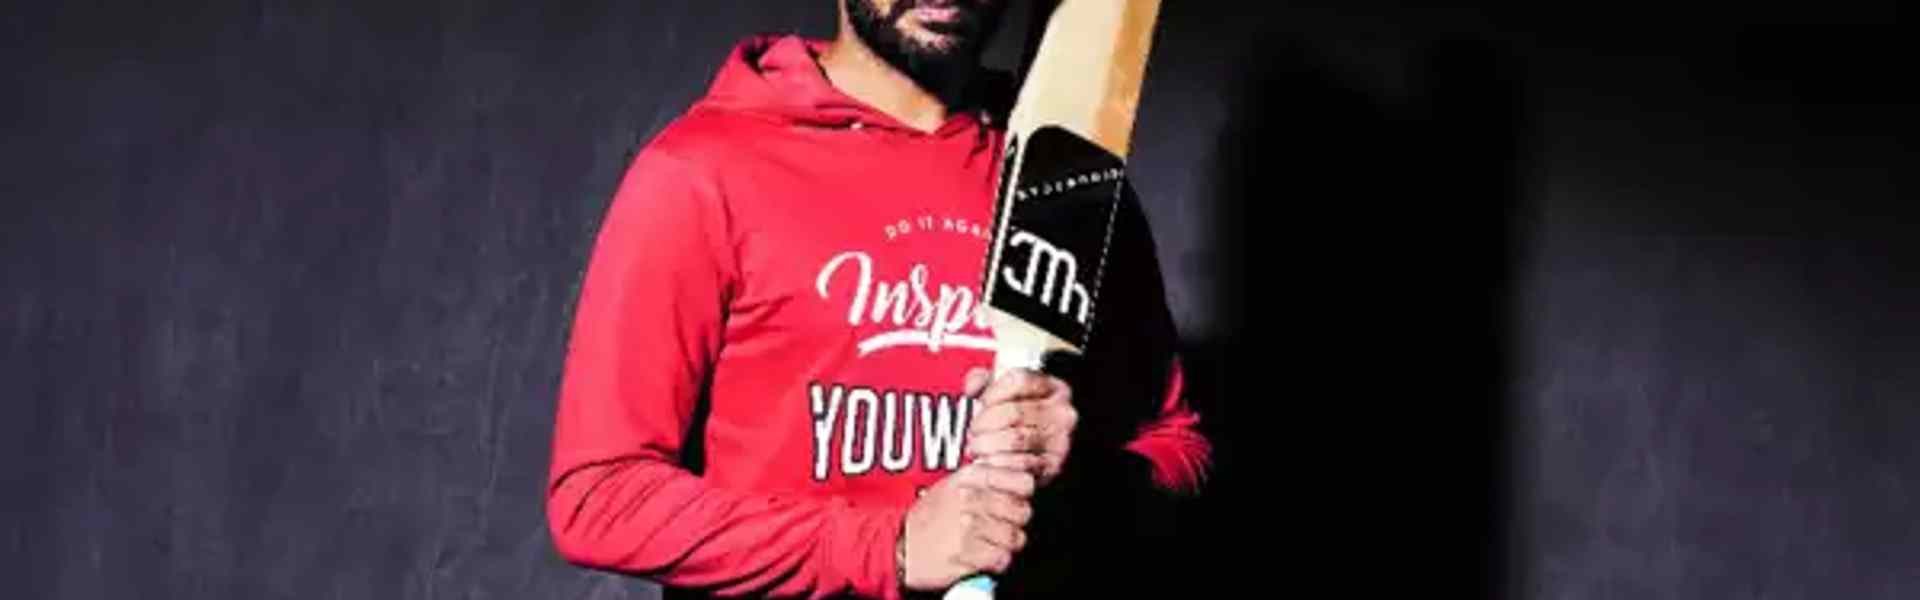 Colexion has come up with an exclusive NFT drop of legendary cricketer Yuvraj Singh. (Image Credit: Twitter)